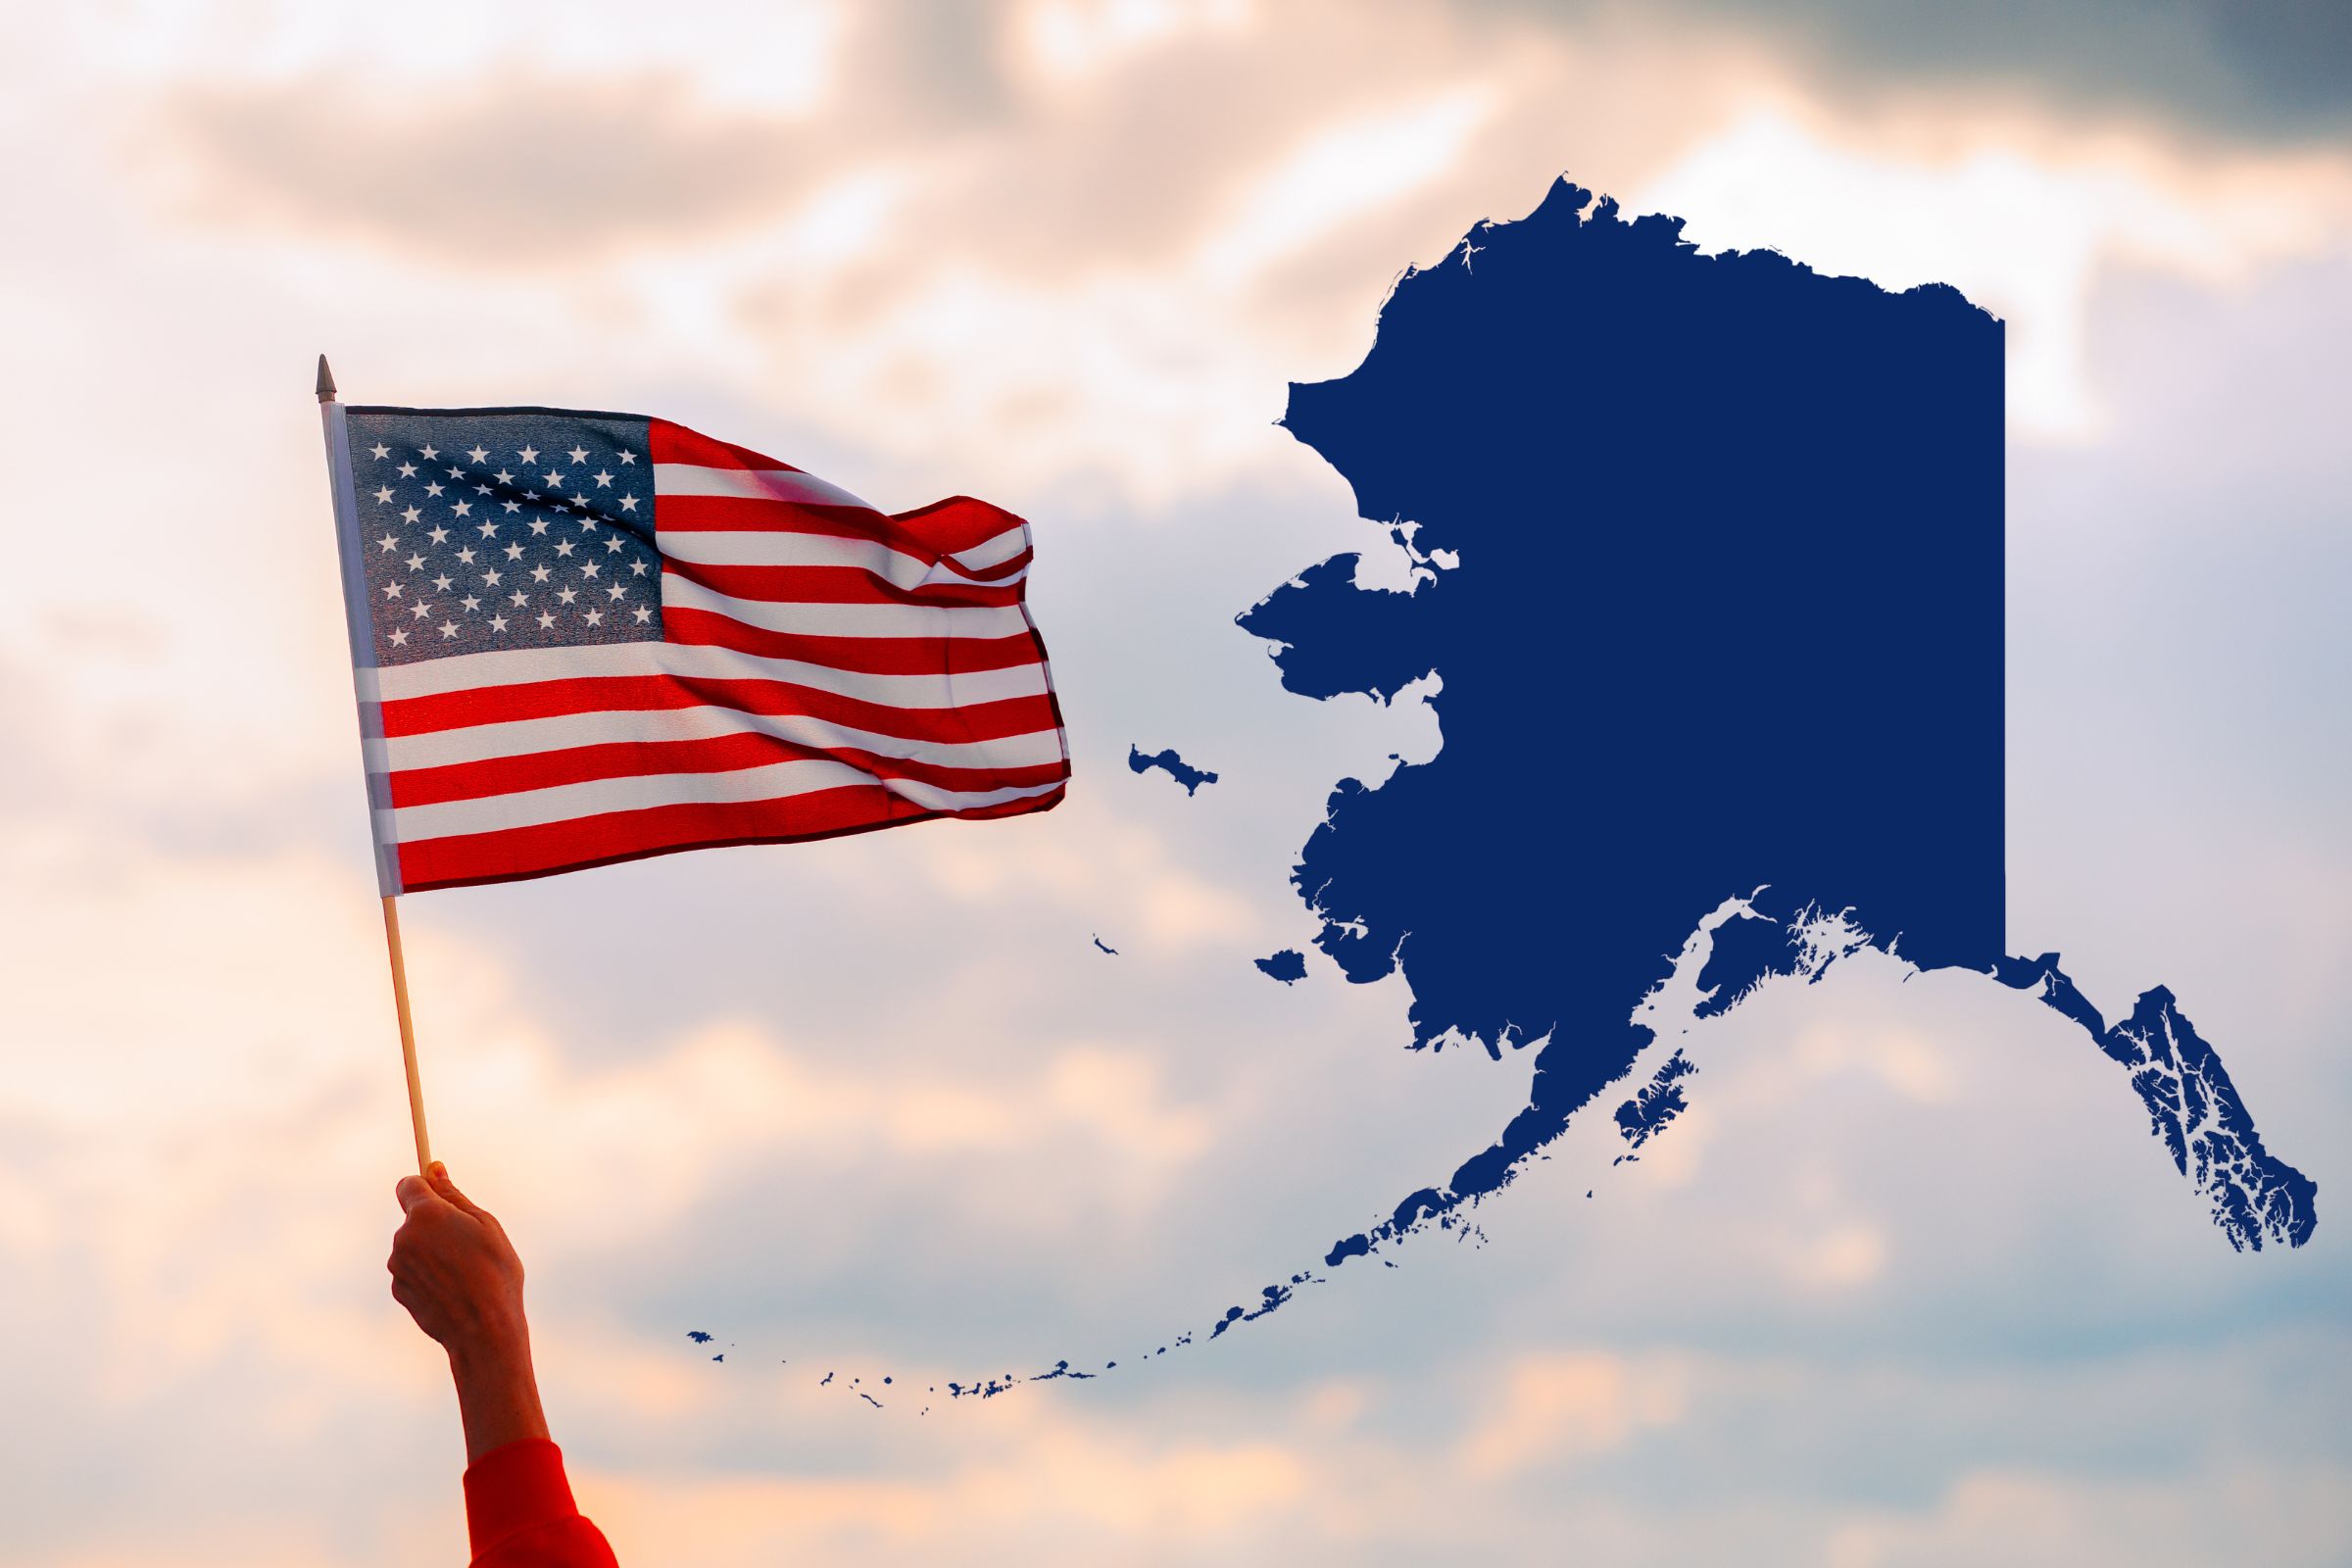 Alaska secession calls grow as more than a third want state to leave US